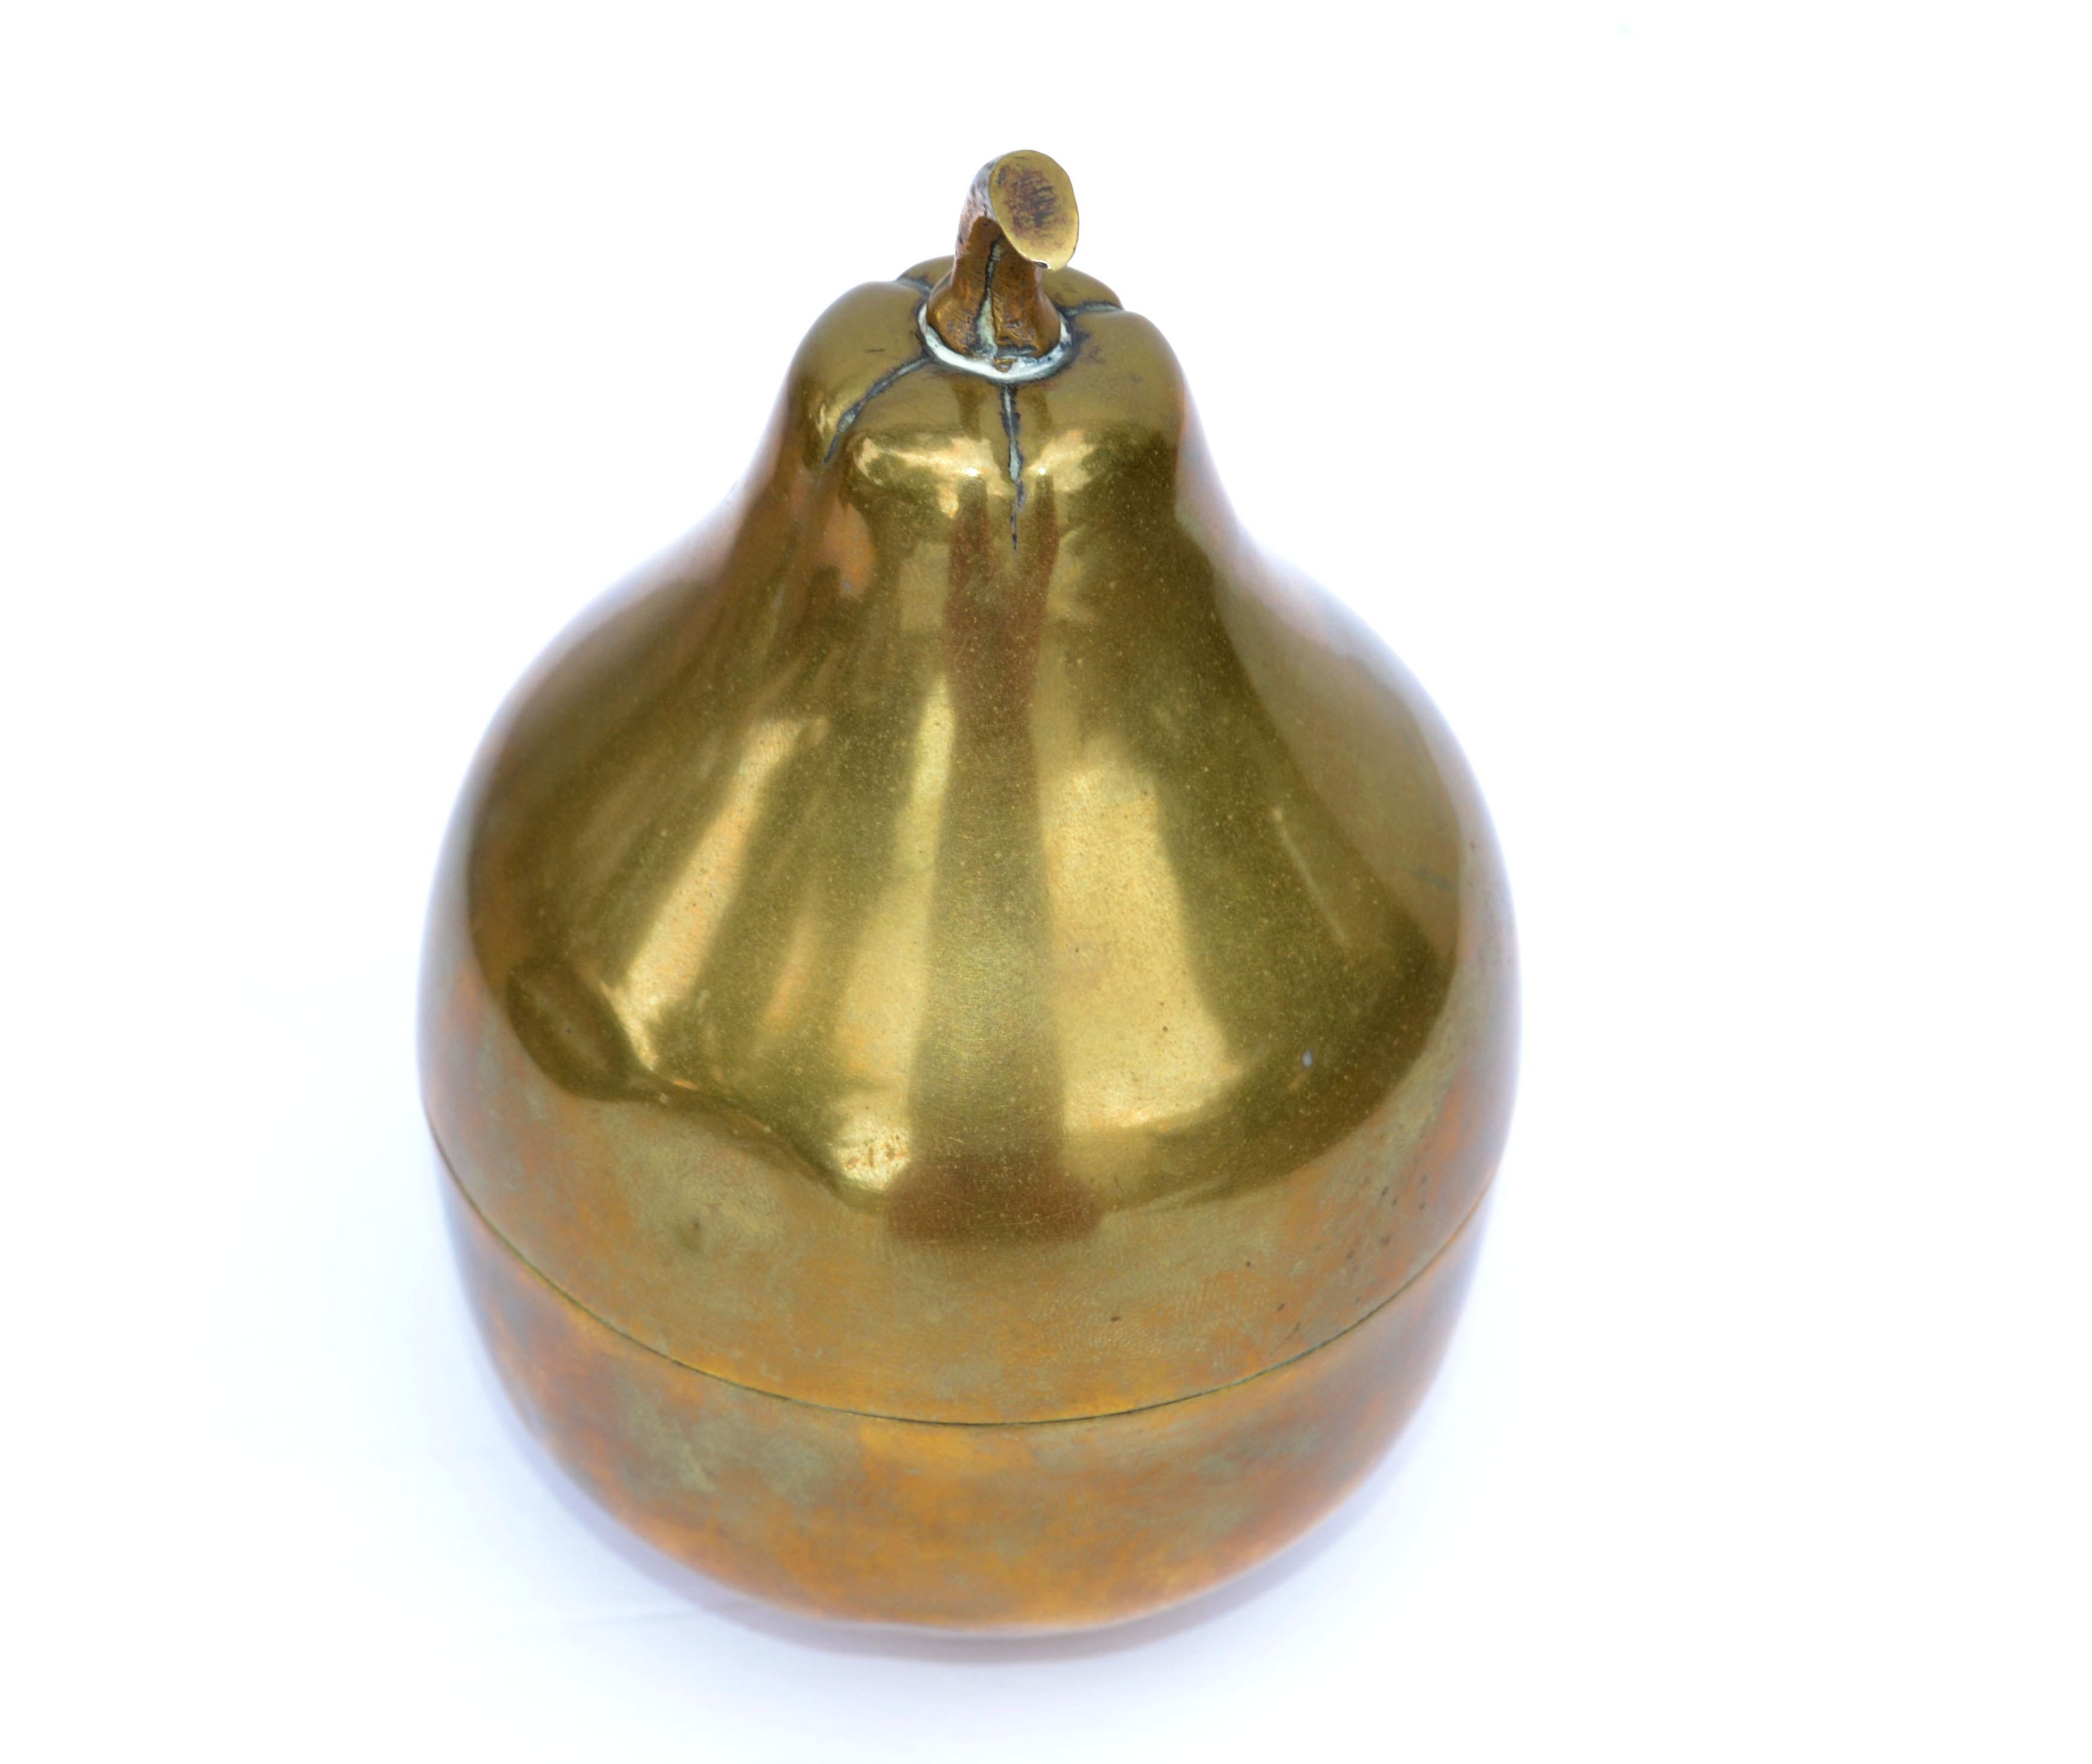 Old superb ice bucket, ice cube box or Fruit Sculpture in the form of a pear in Brass, removable lid complete with naturalistic leaves and stalk.
The Insulation is missing and shows the silver plate in distressed look.
Marked with R.V.P. F.M. Iron